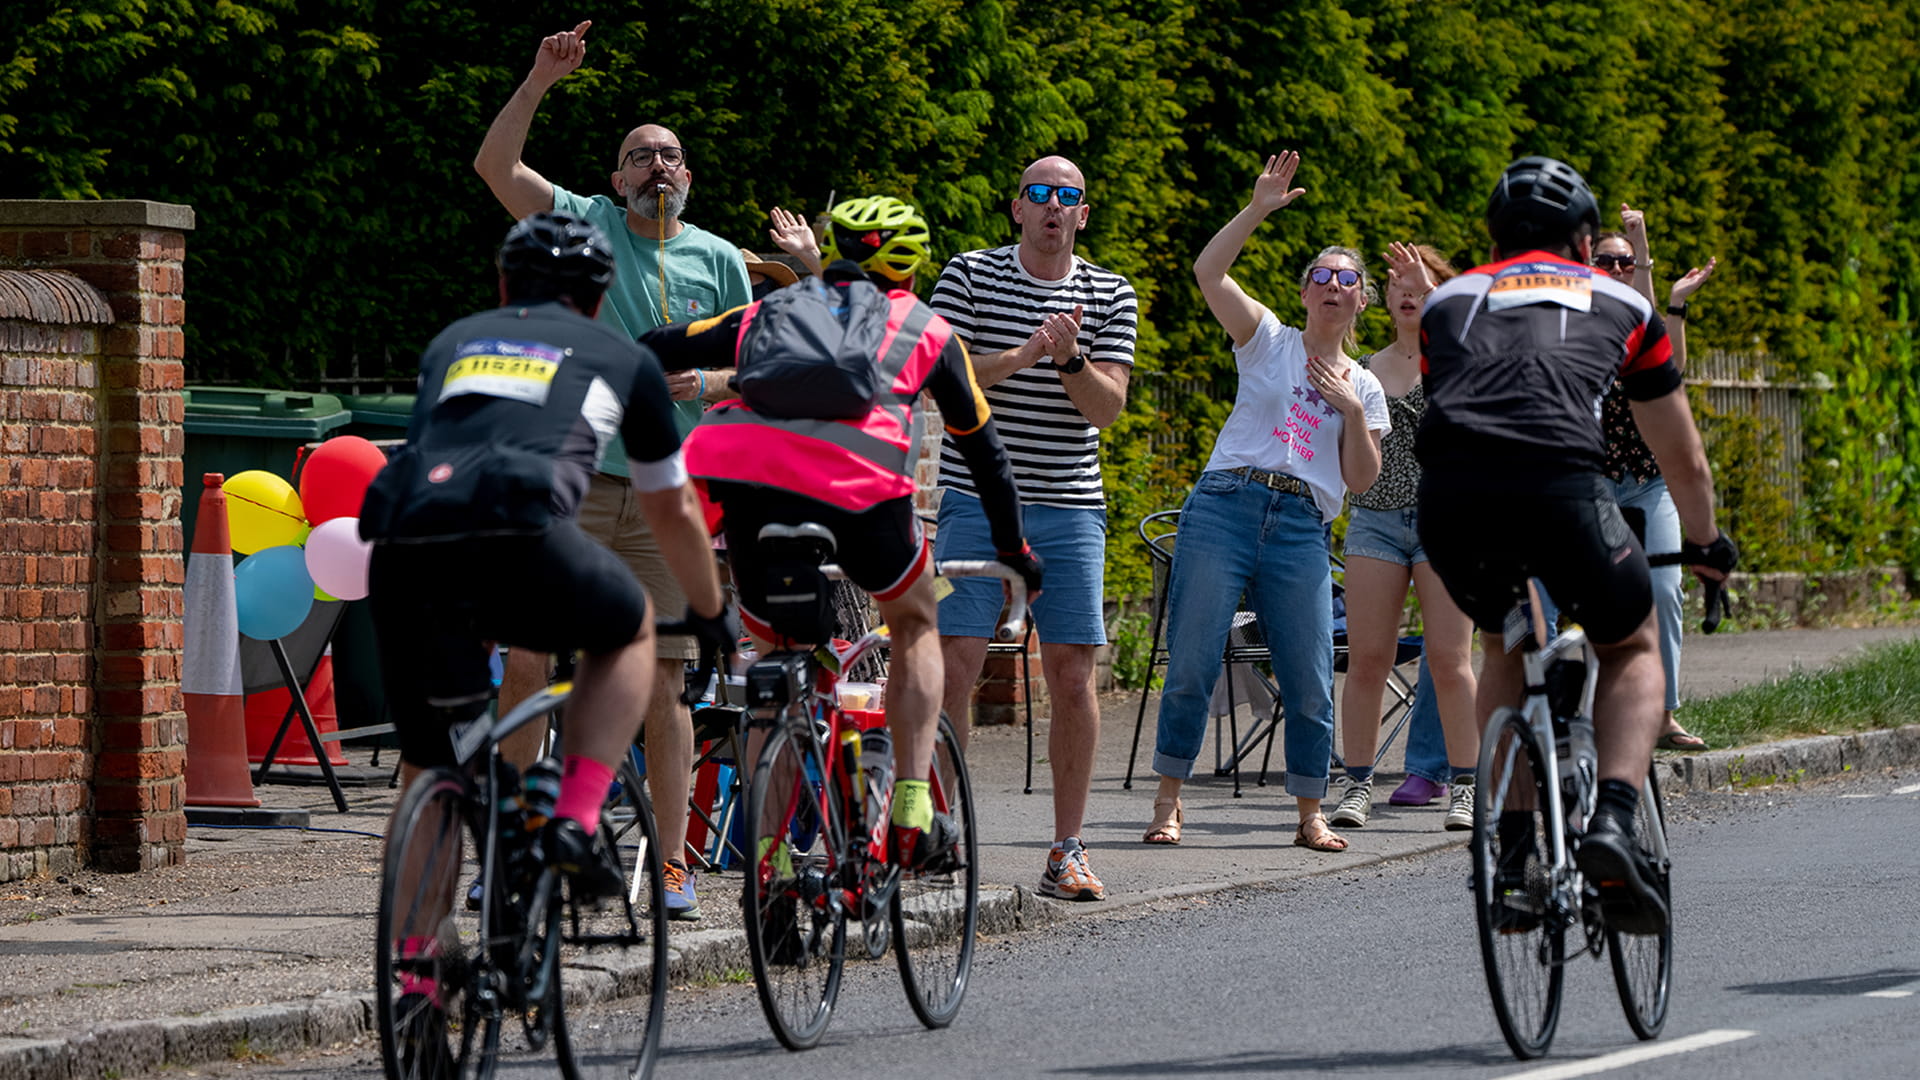 Supporters on the Ford RideLondon route 